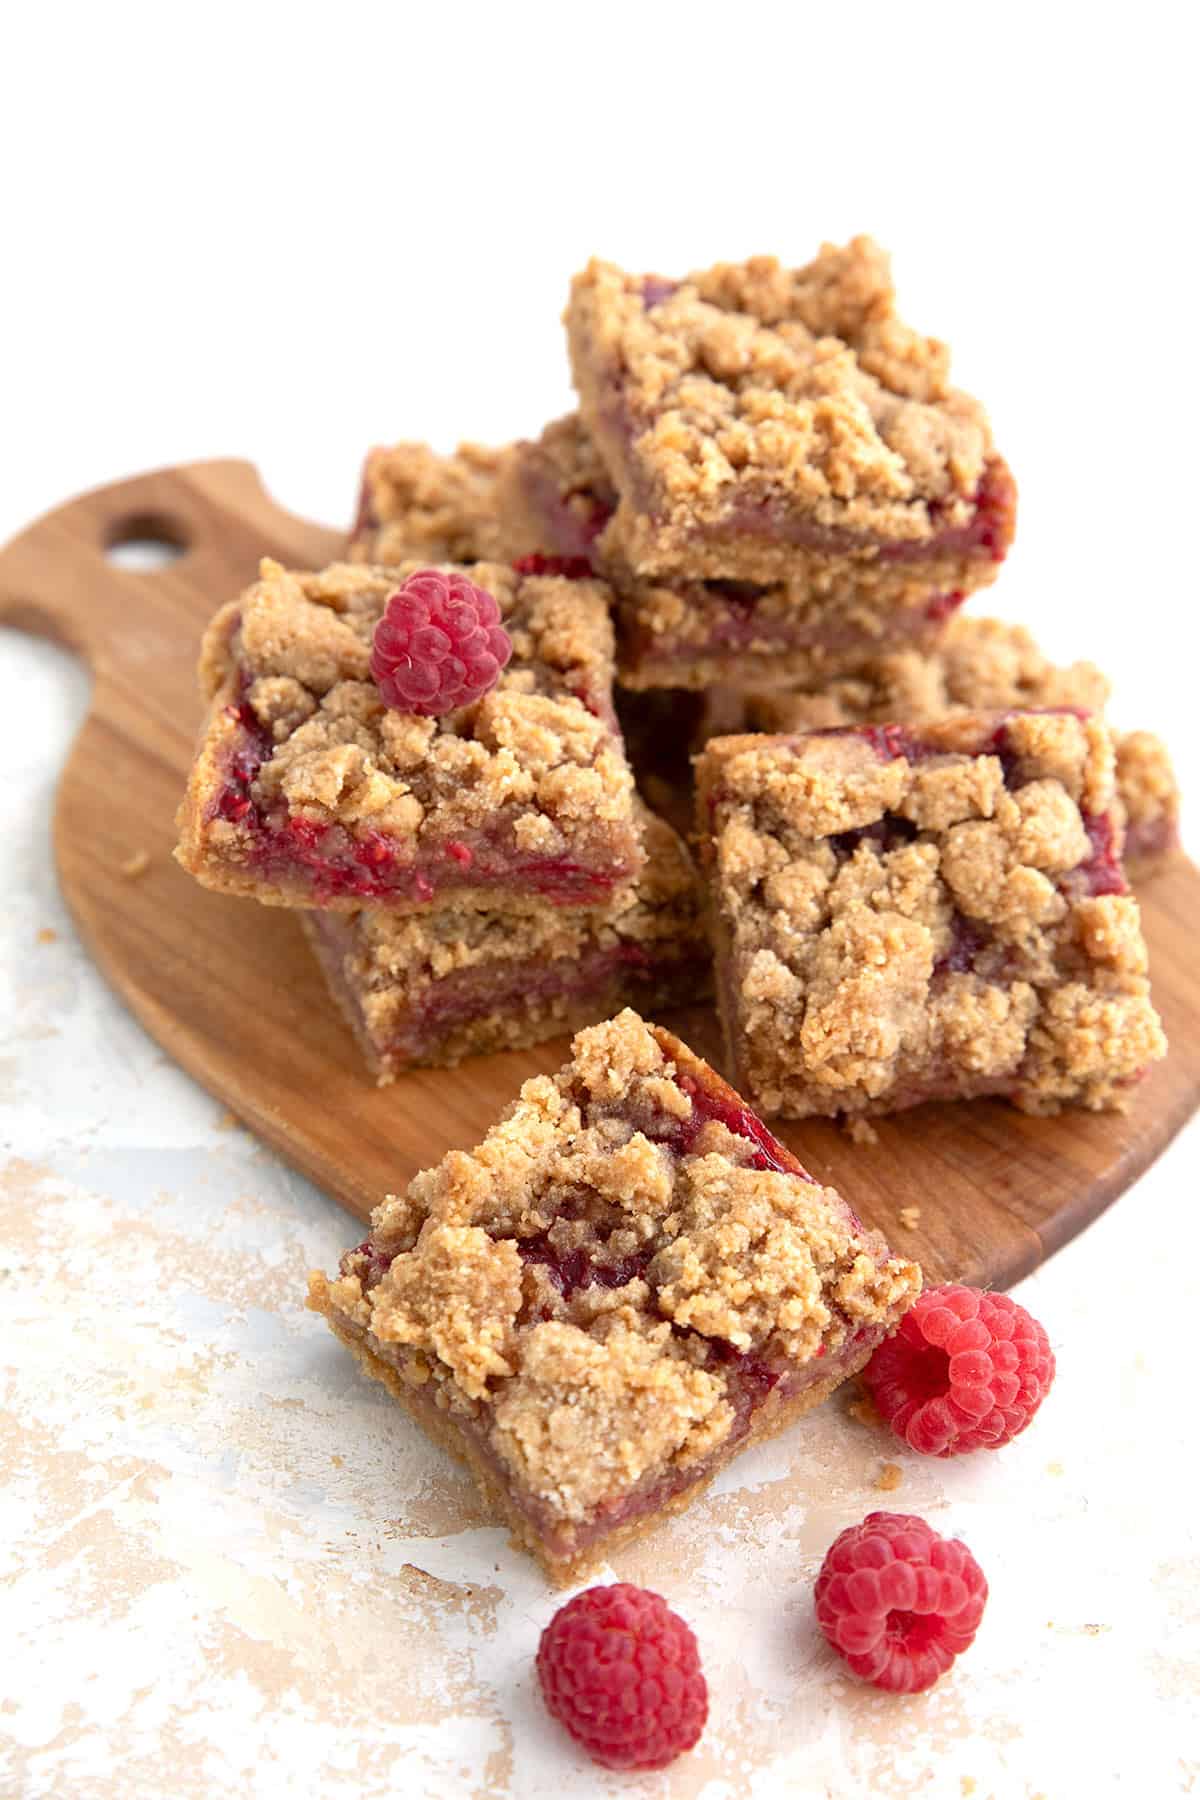 Peanut Butter and Jelly Bars on a wooden cutting board with fresh raspberries around it.